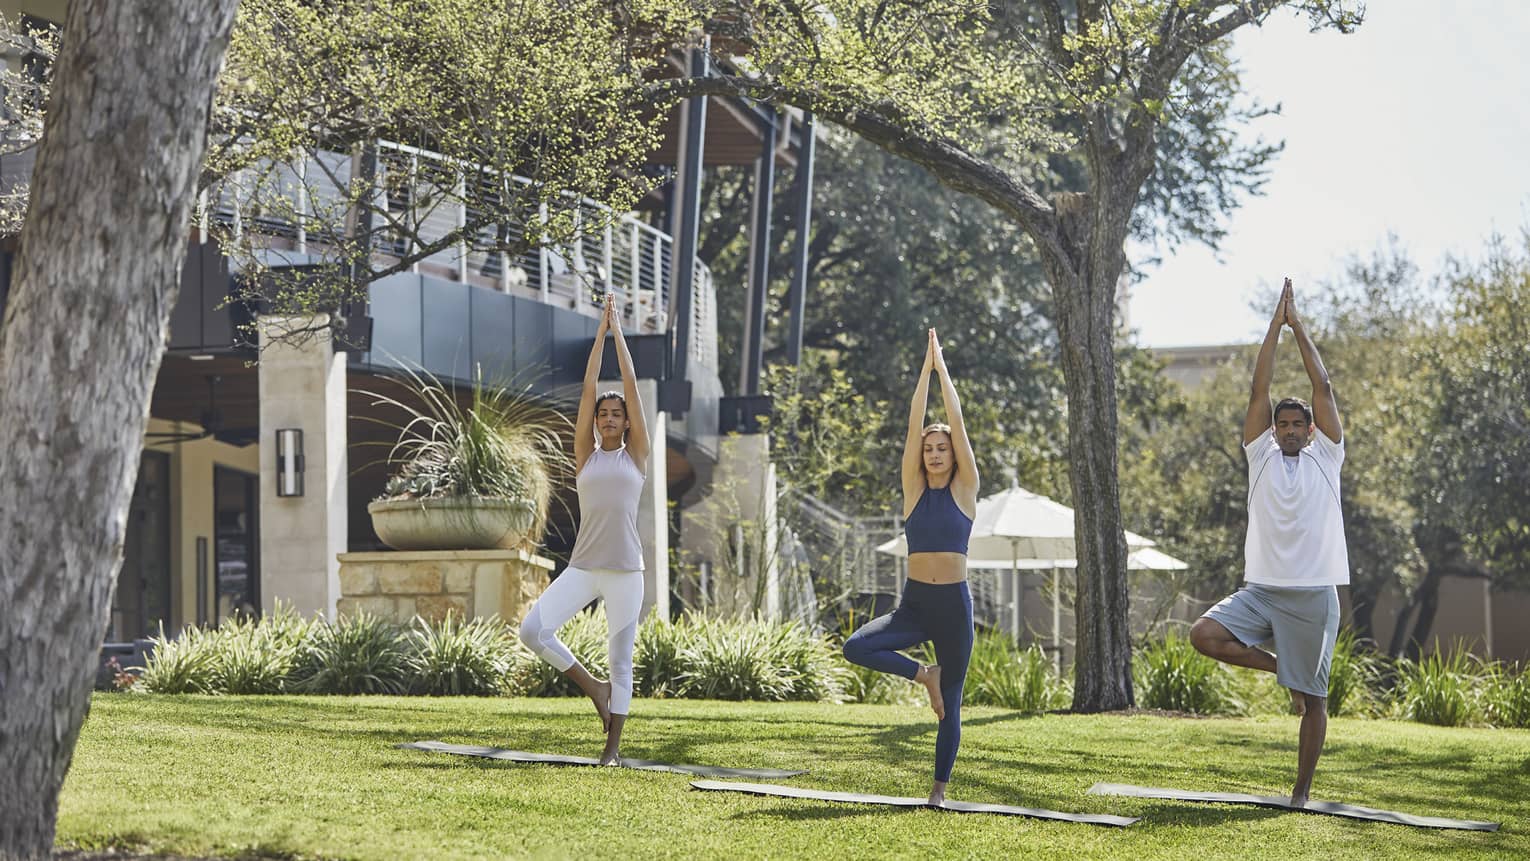 Guests balance while extending their arms to the sky during a yoga session